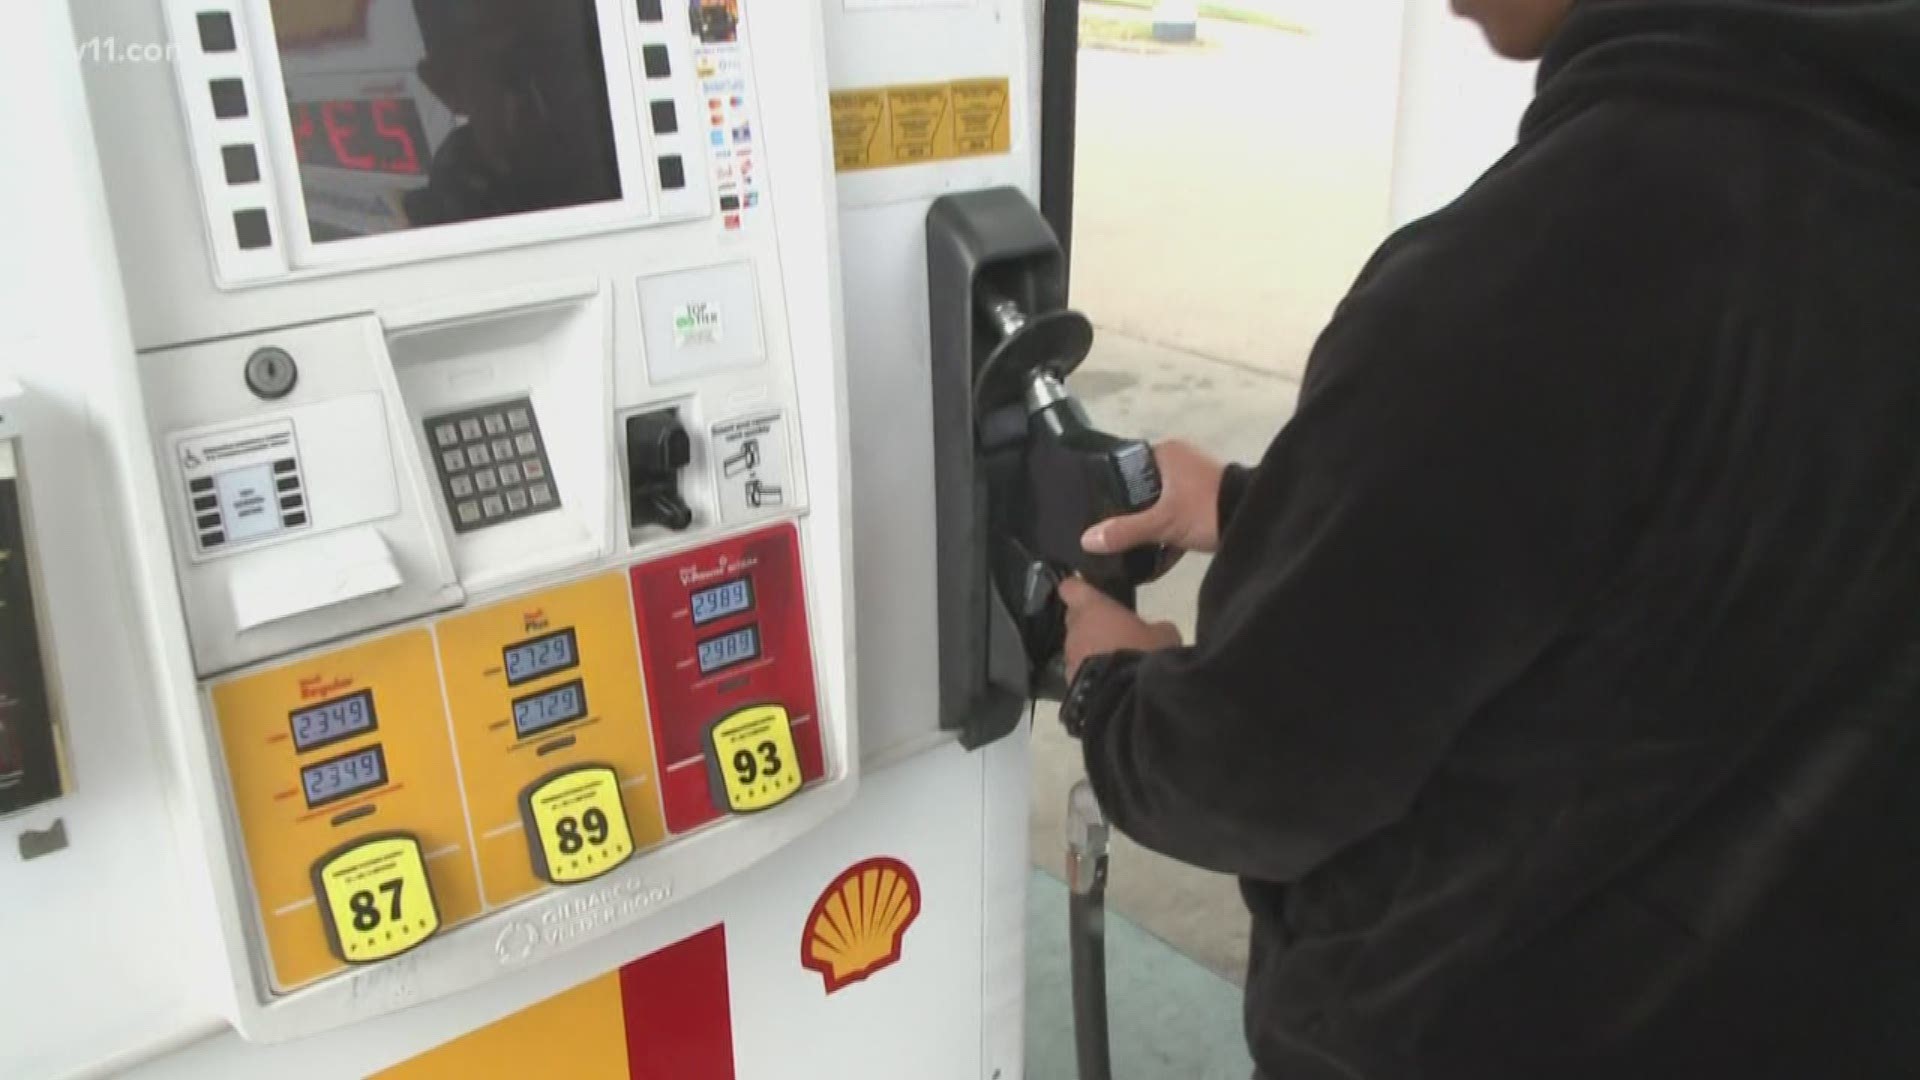 With spring comes warmer weather and plenty of sunshine but it also brings higher gas prices.